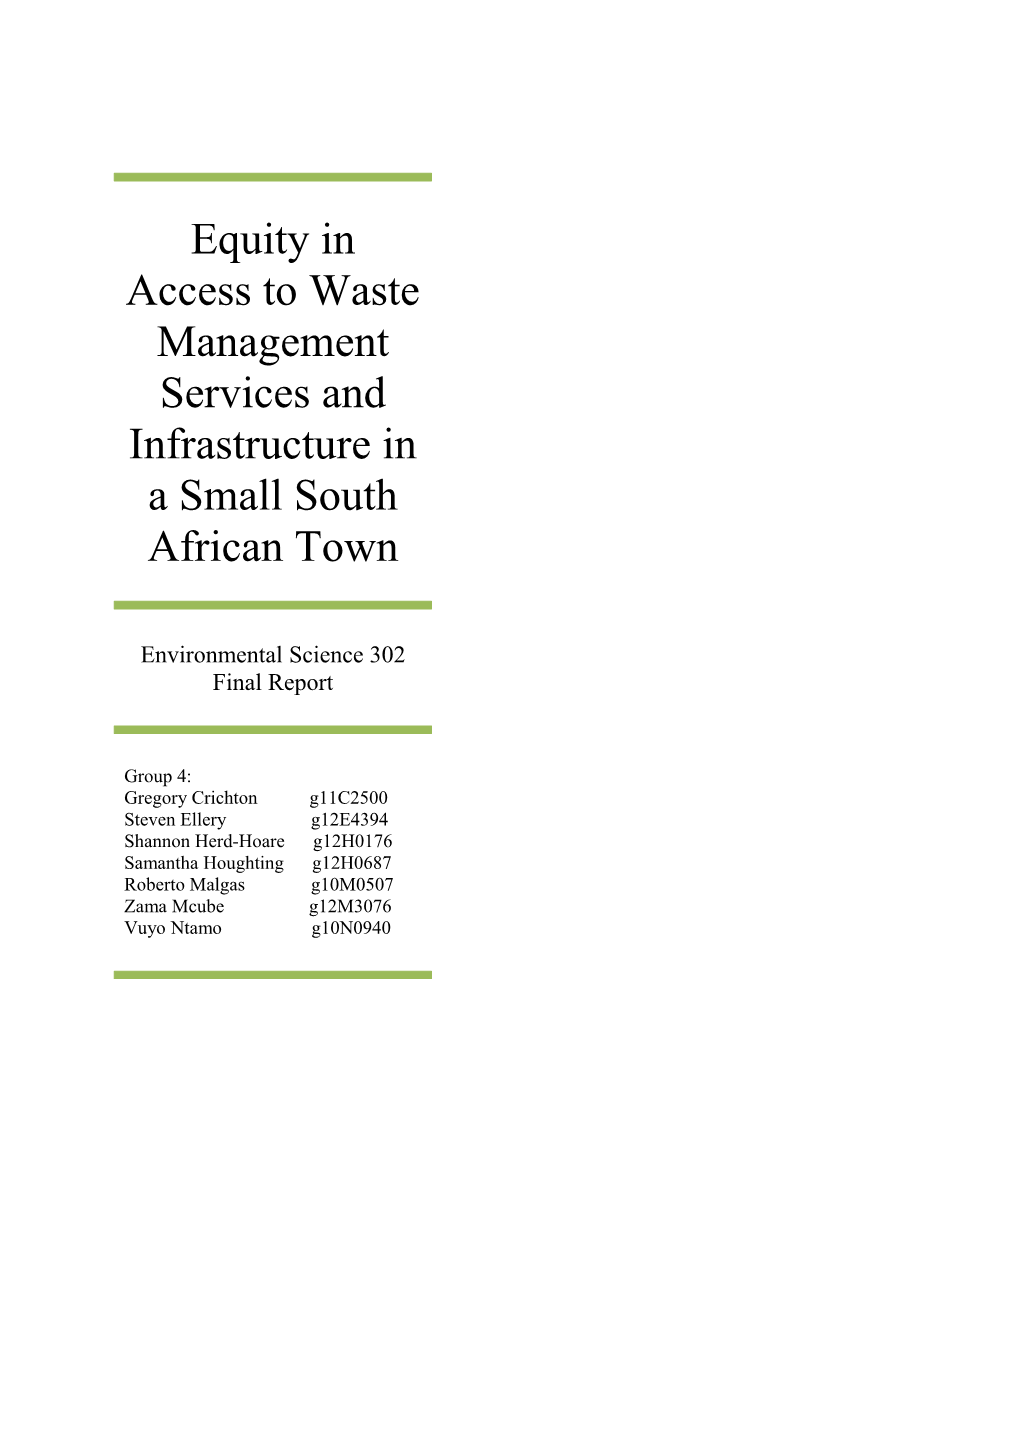 Equity in Access to Waste Management Services and Infrastructure in a Small South African Town